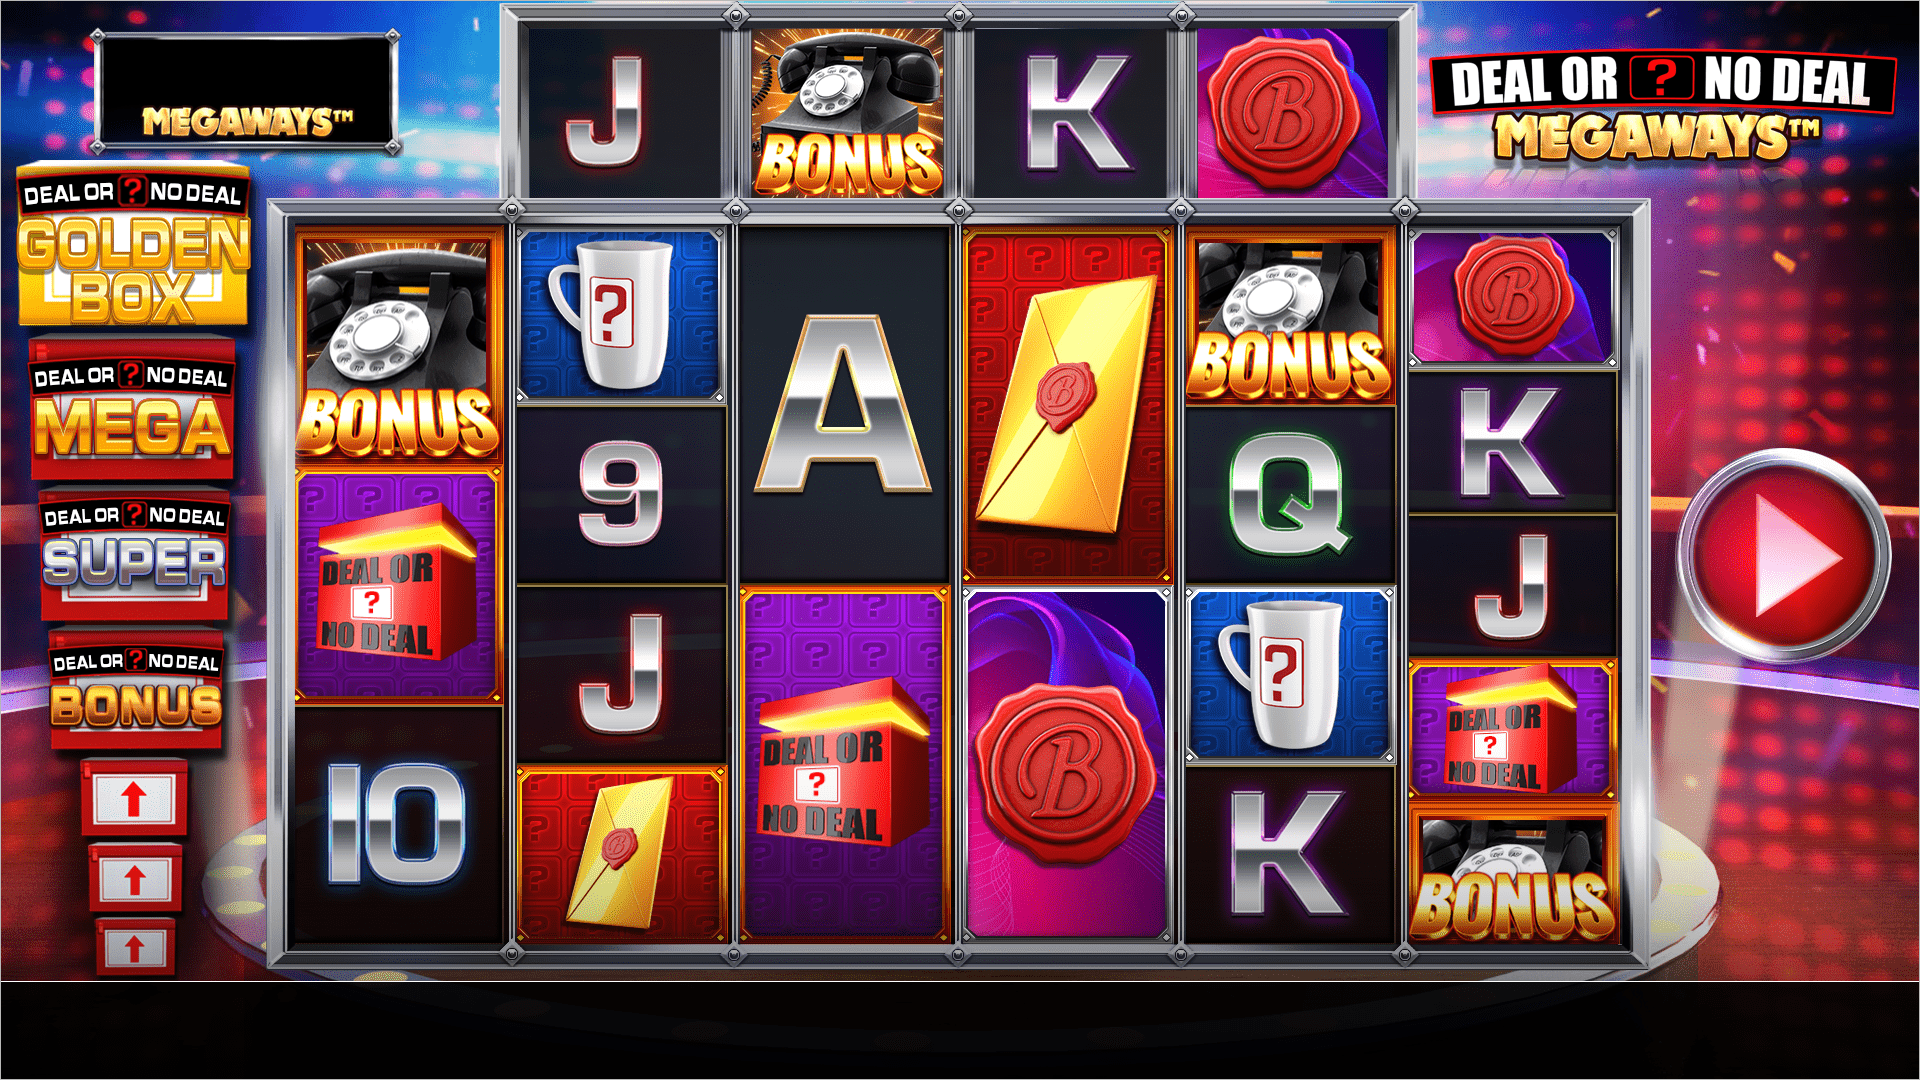 Deal Or No Deal Megaways – The Golden Box Free Spins